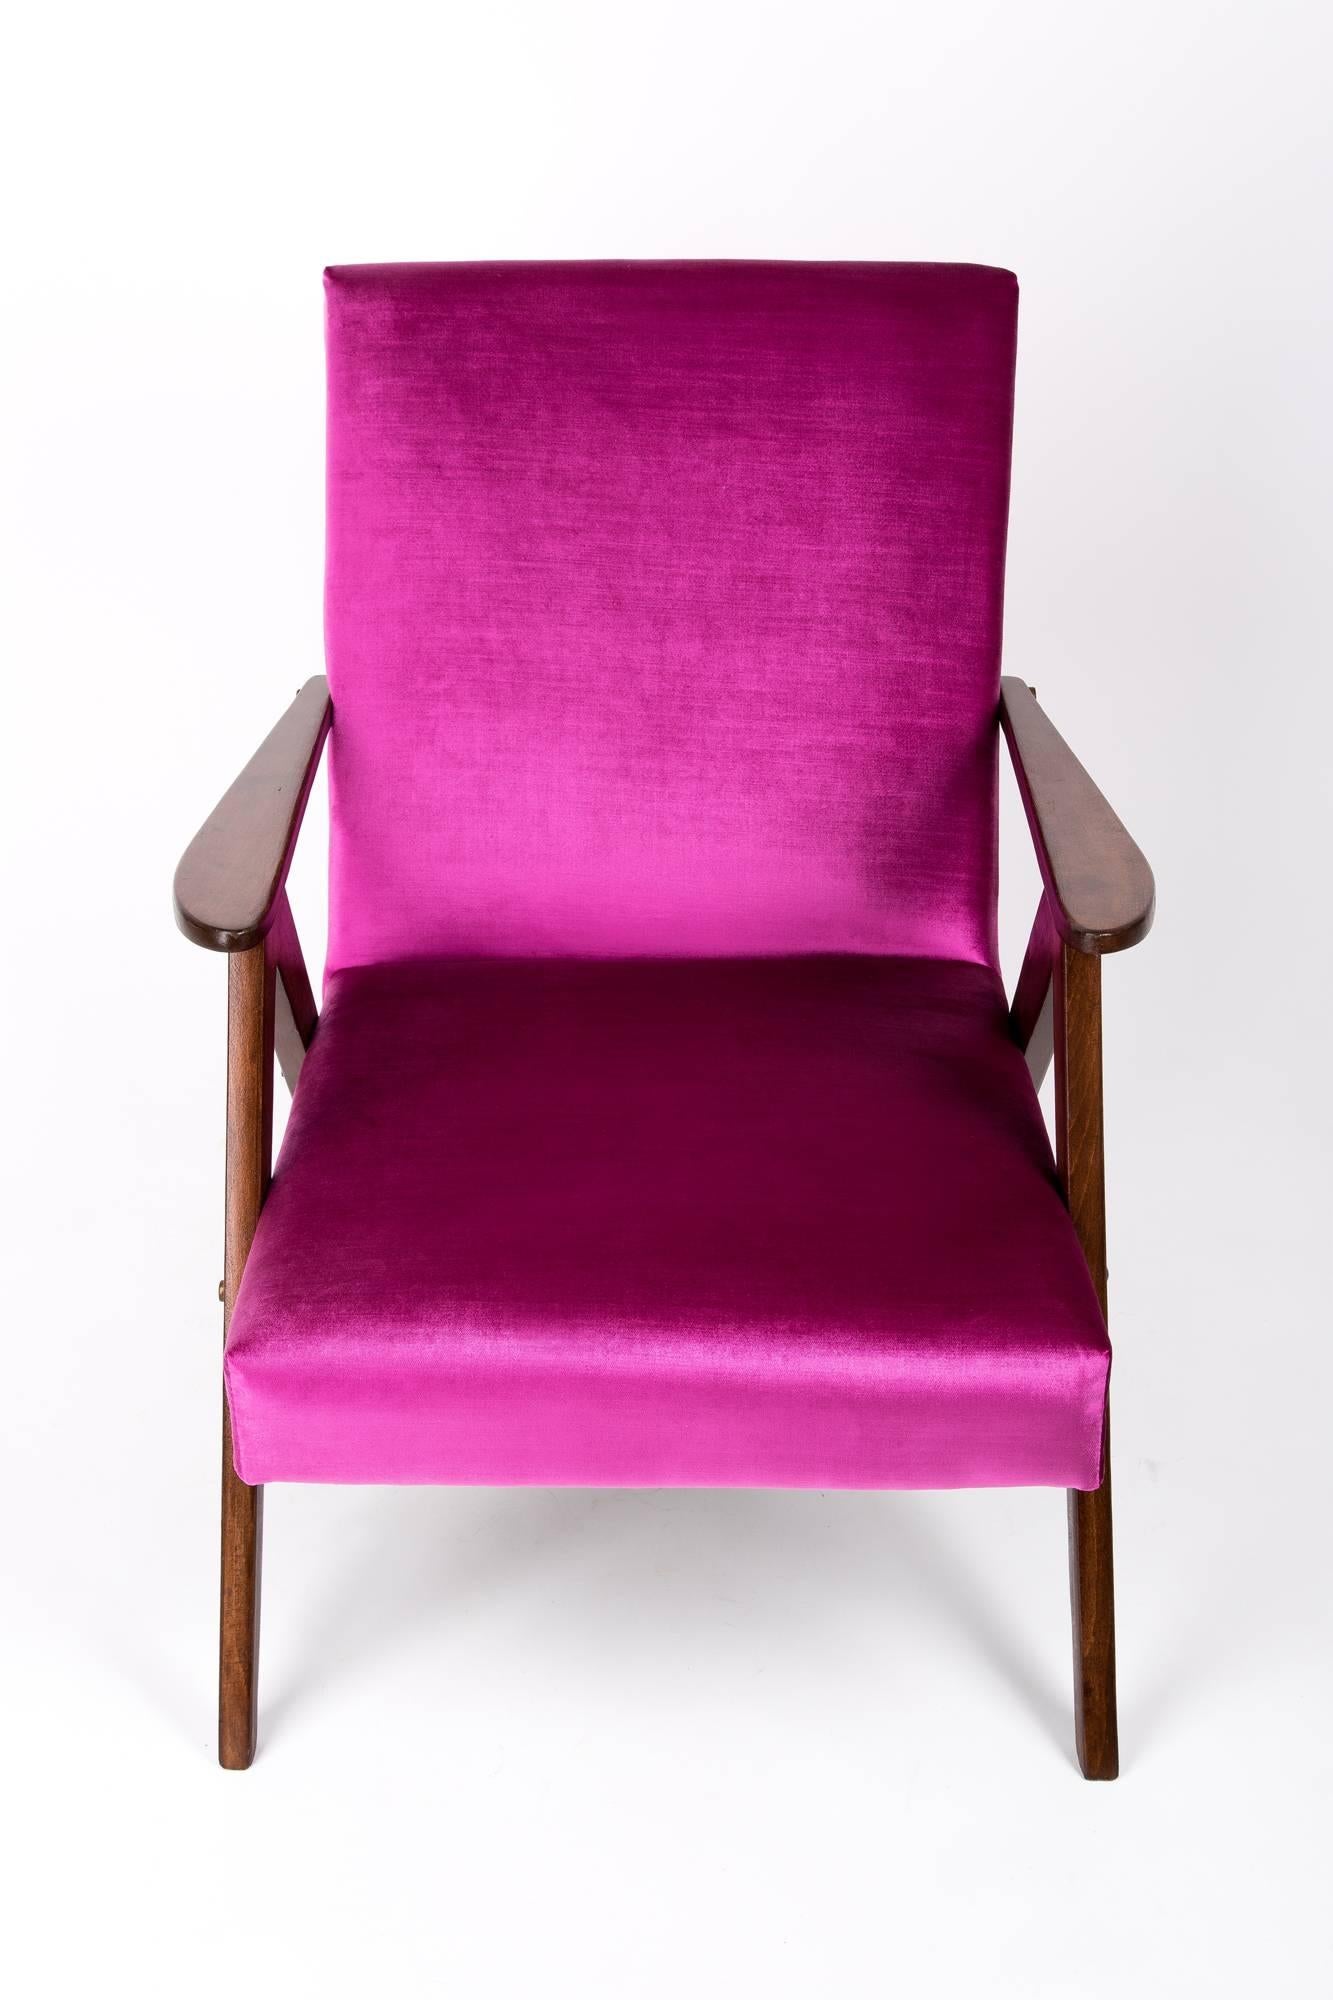 Polish Set of Two Mid-Century Modern Magenta Pink Armchairs, 1960s, Poland For Sale